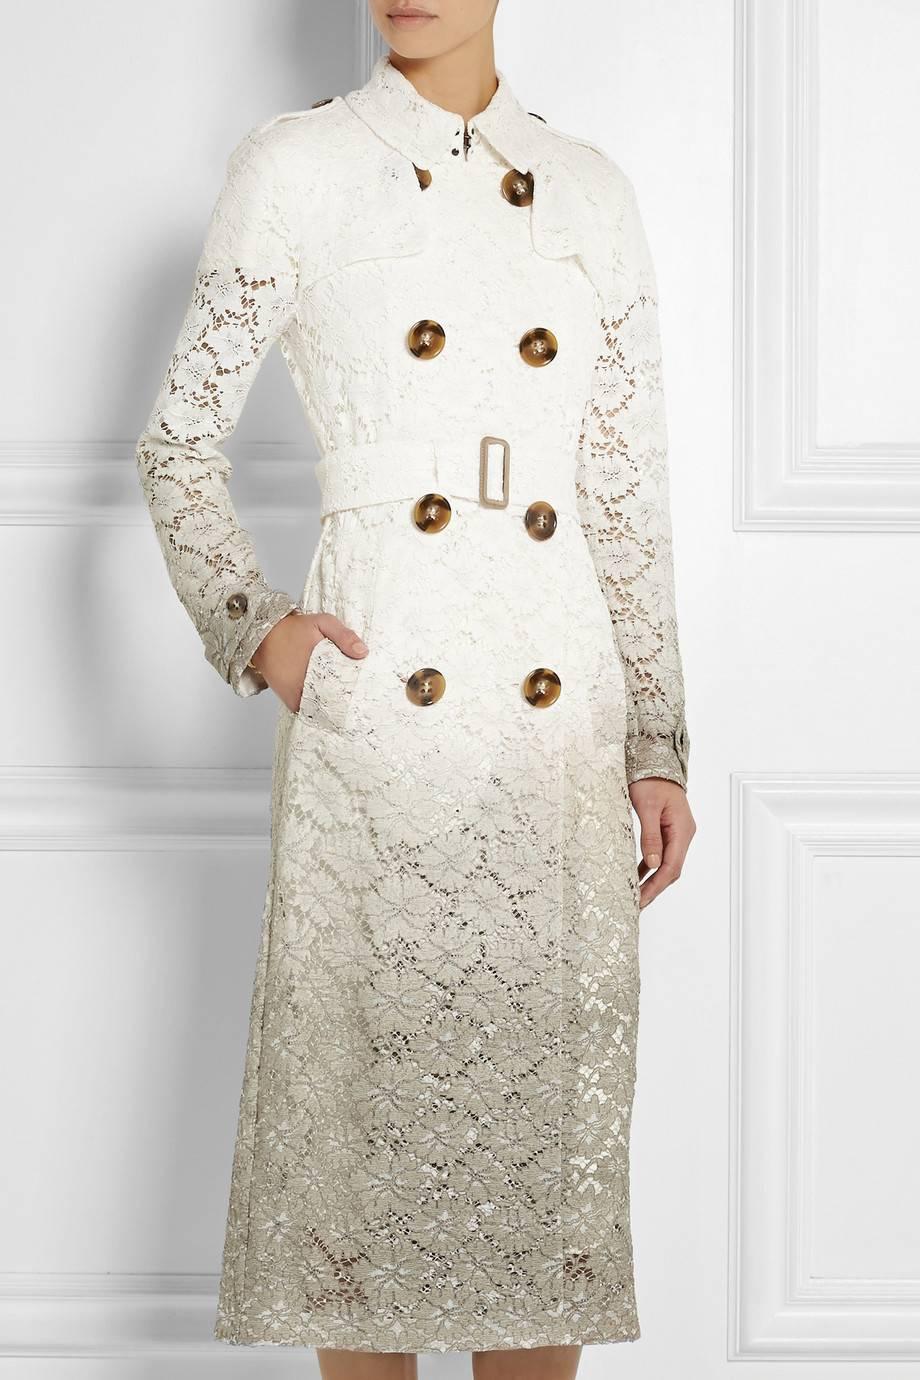 Burberry Lace Trench - For Sale on 1stDibs | burberry lace trench coat, lace  trench coat burberry, burberry lace coat